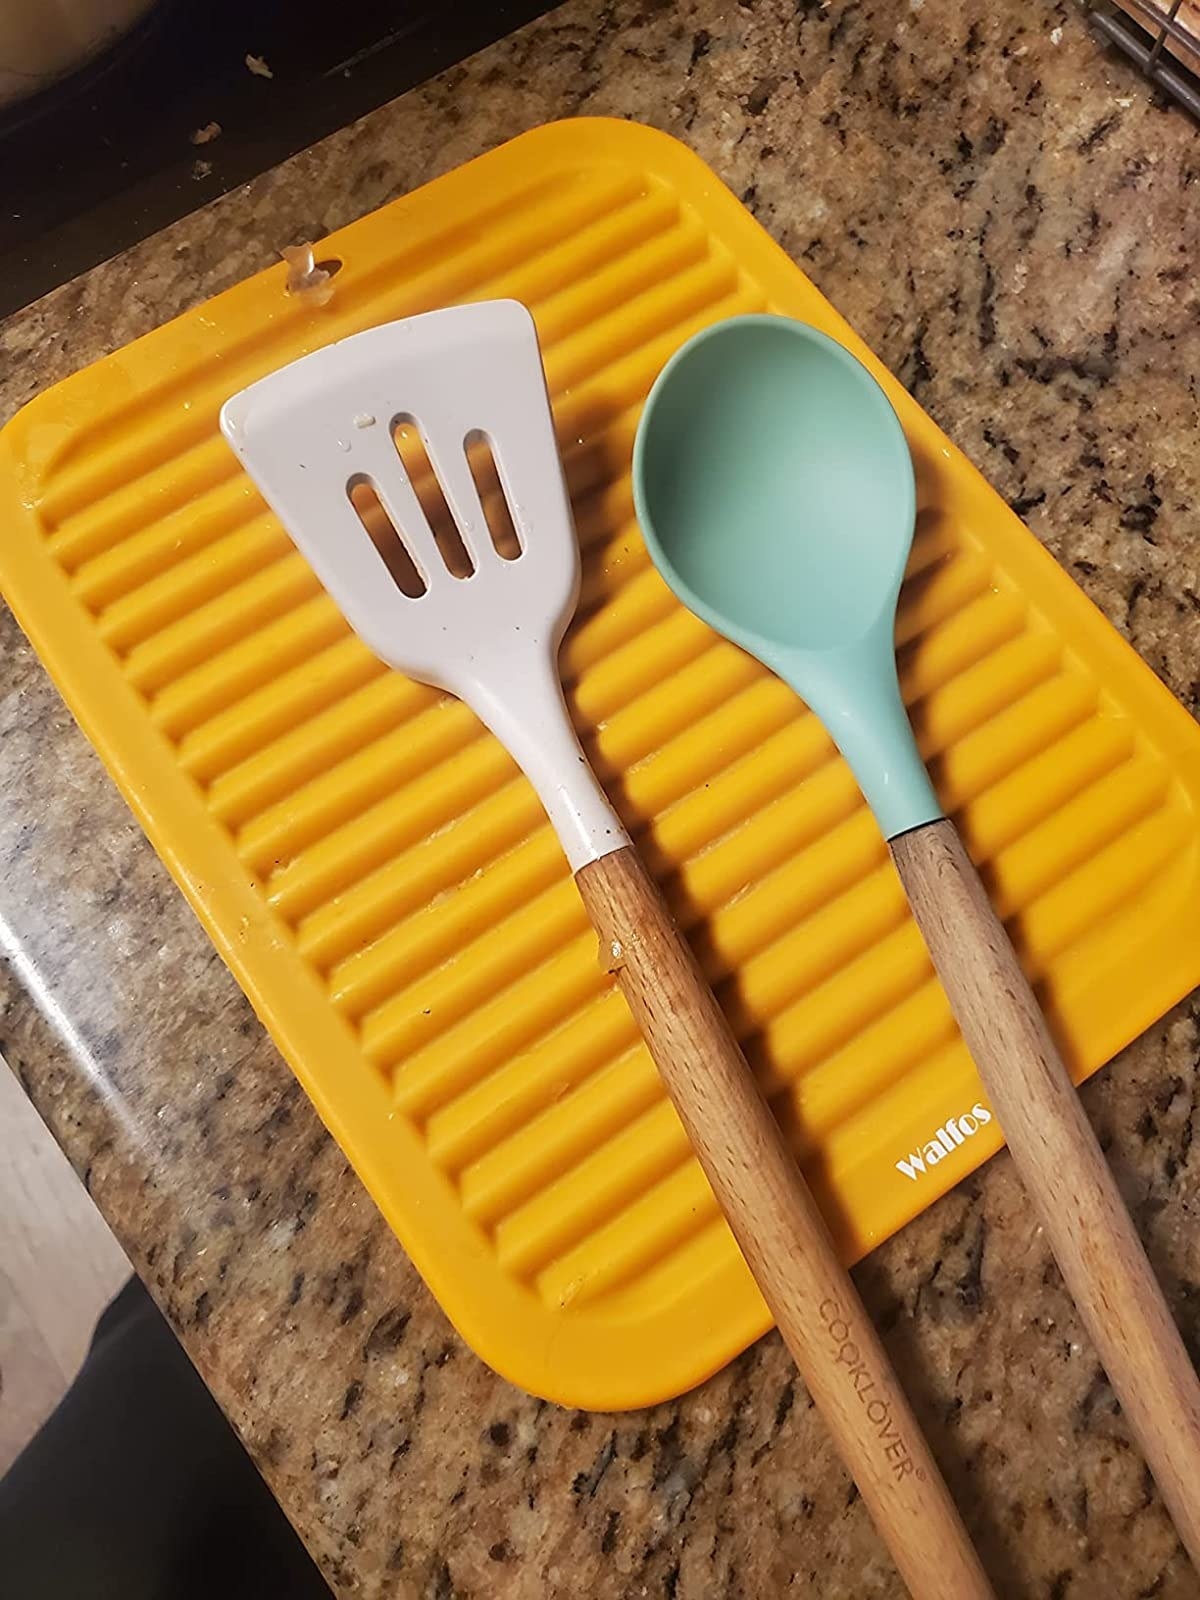 Reviewer image of yellow trivet with cooking utensils on it